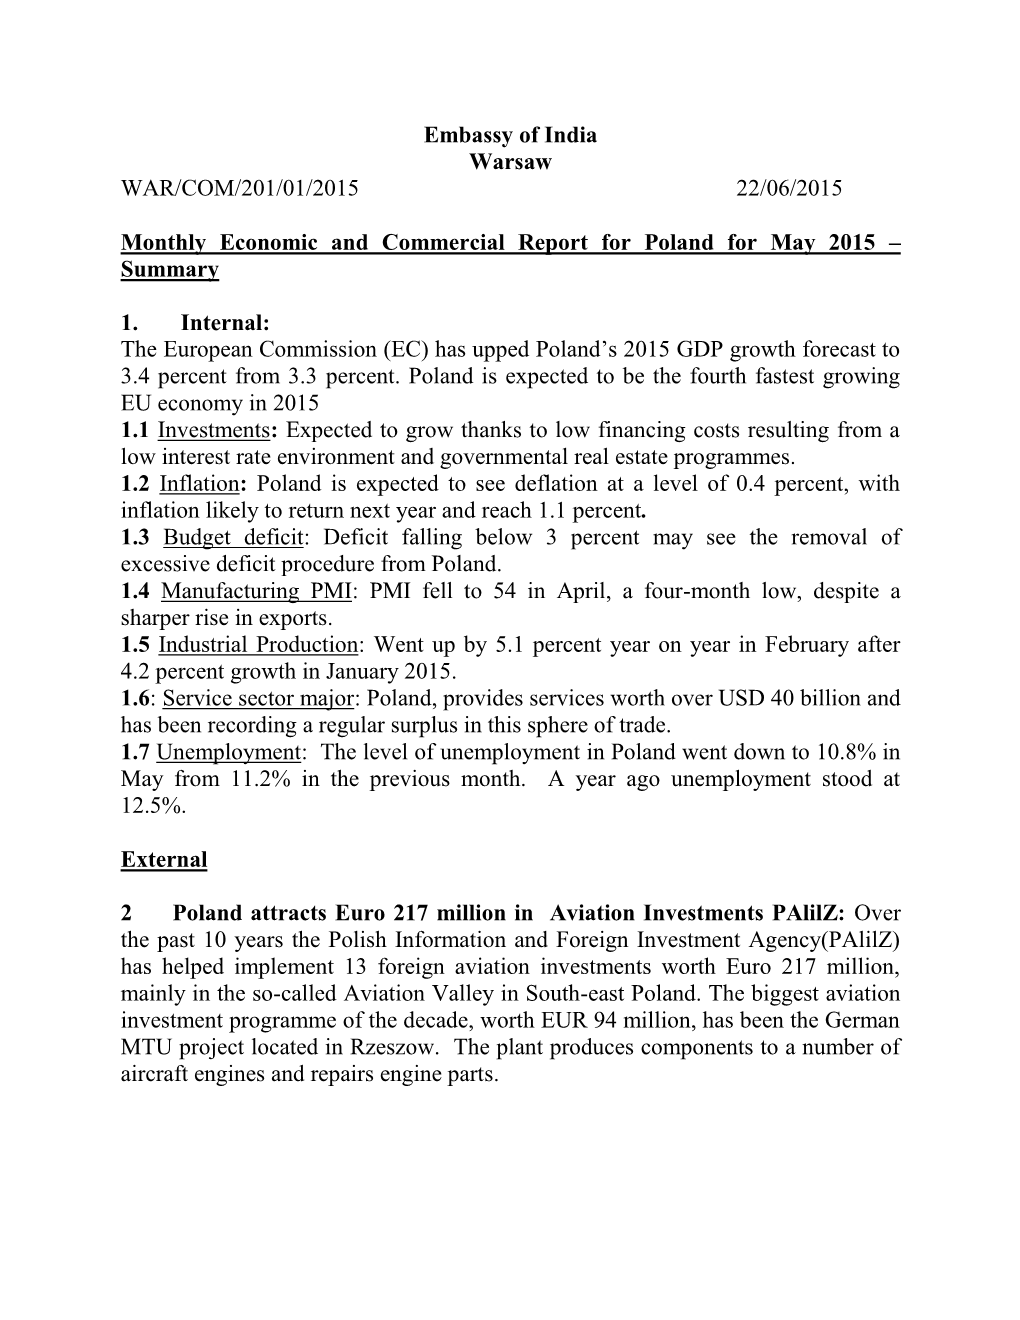 Monthly Economic and Commercial Report for Poland for May 2015 – Summary